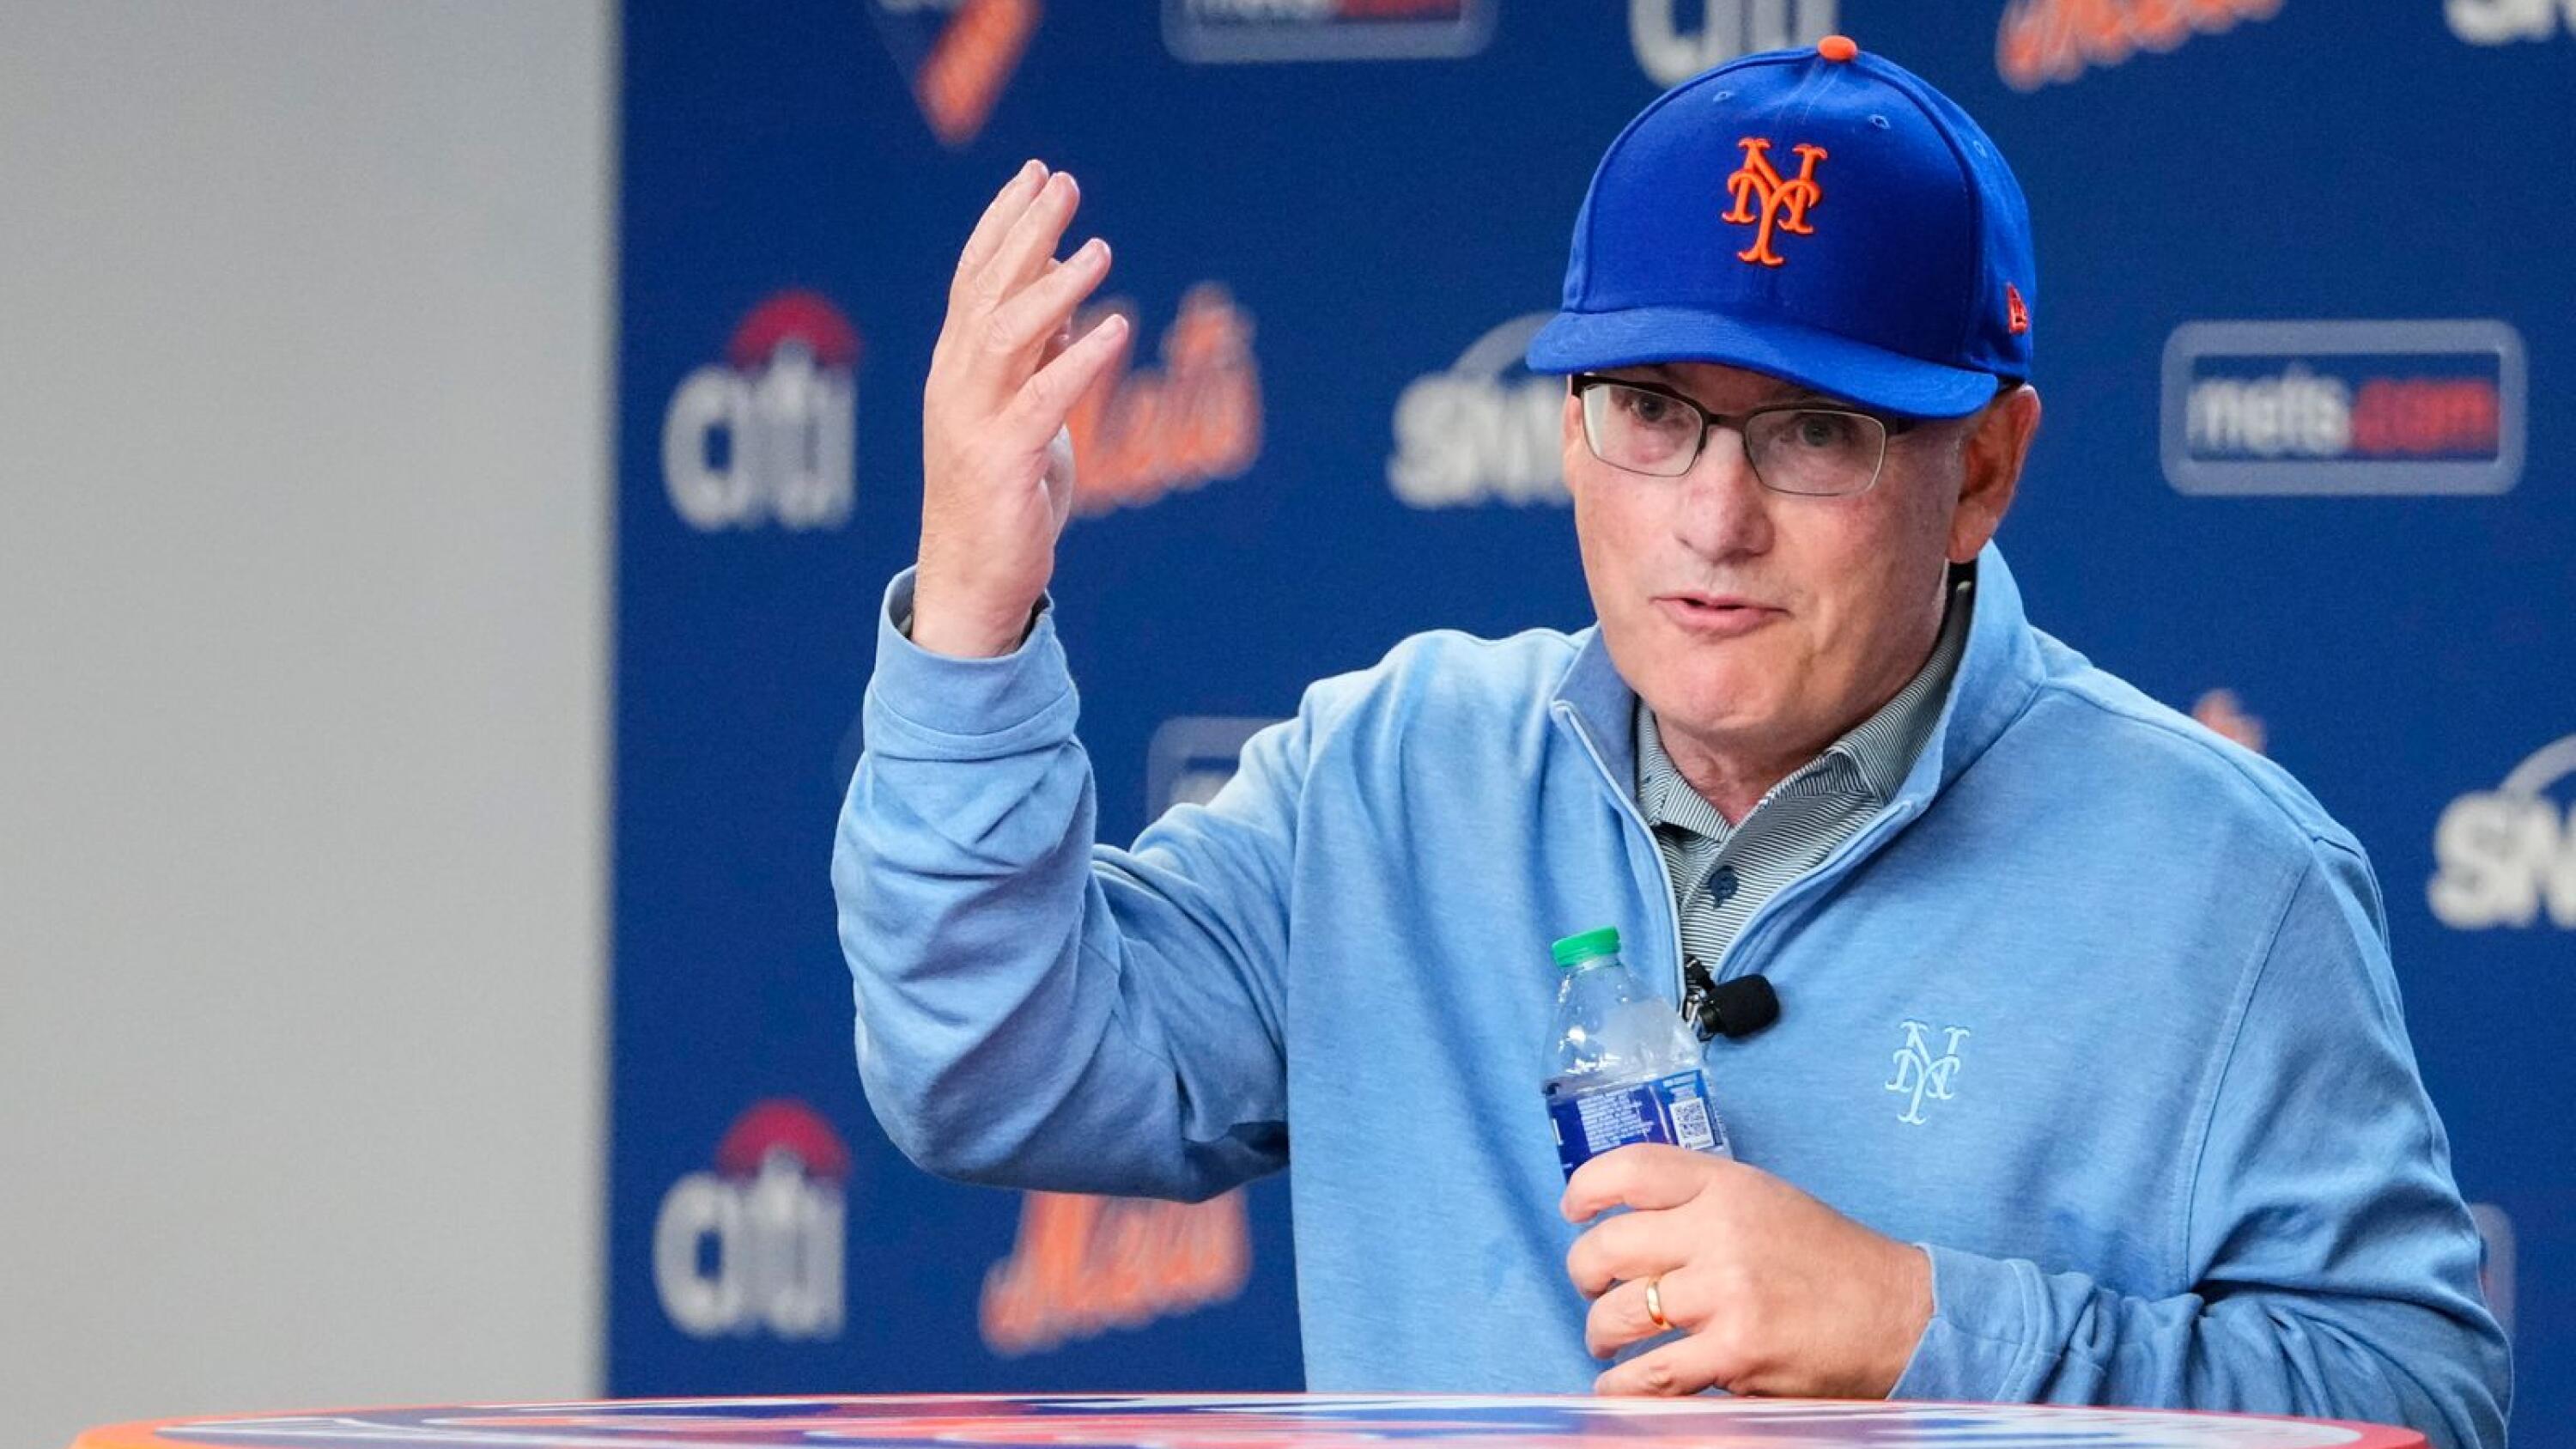 New York Mets on X: Everyone plays a role on this team. We win